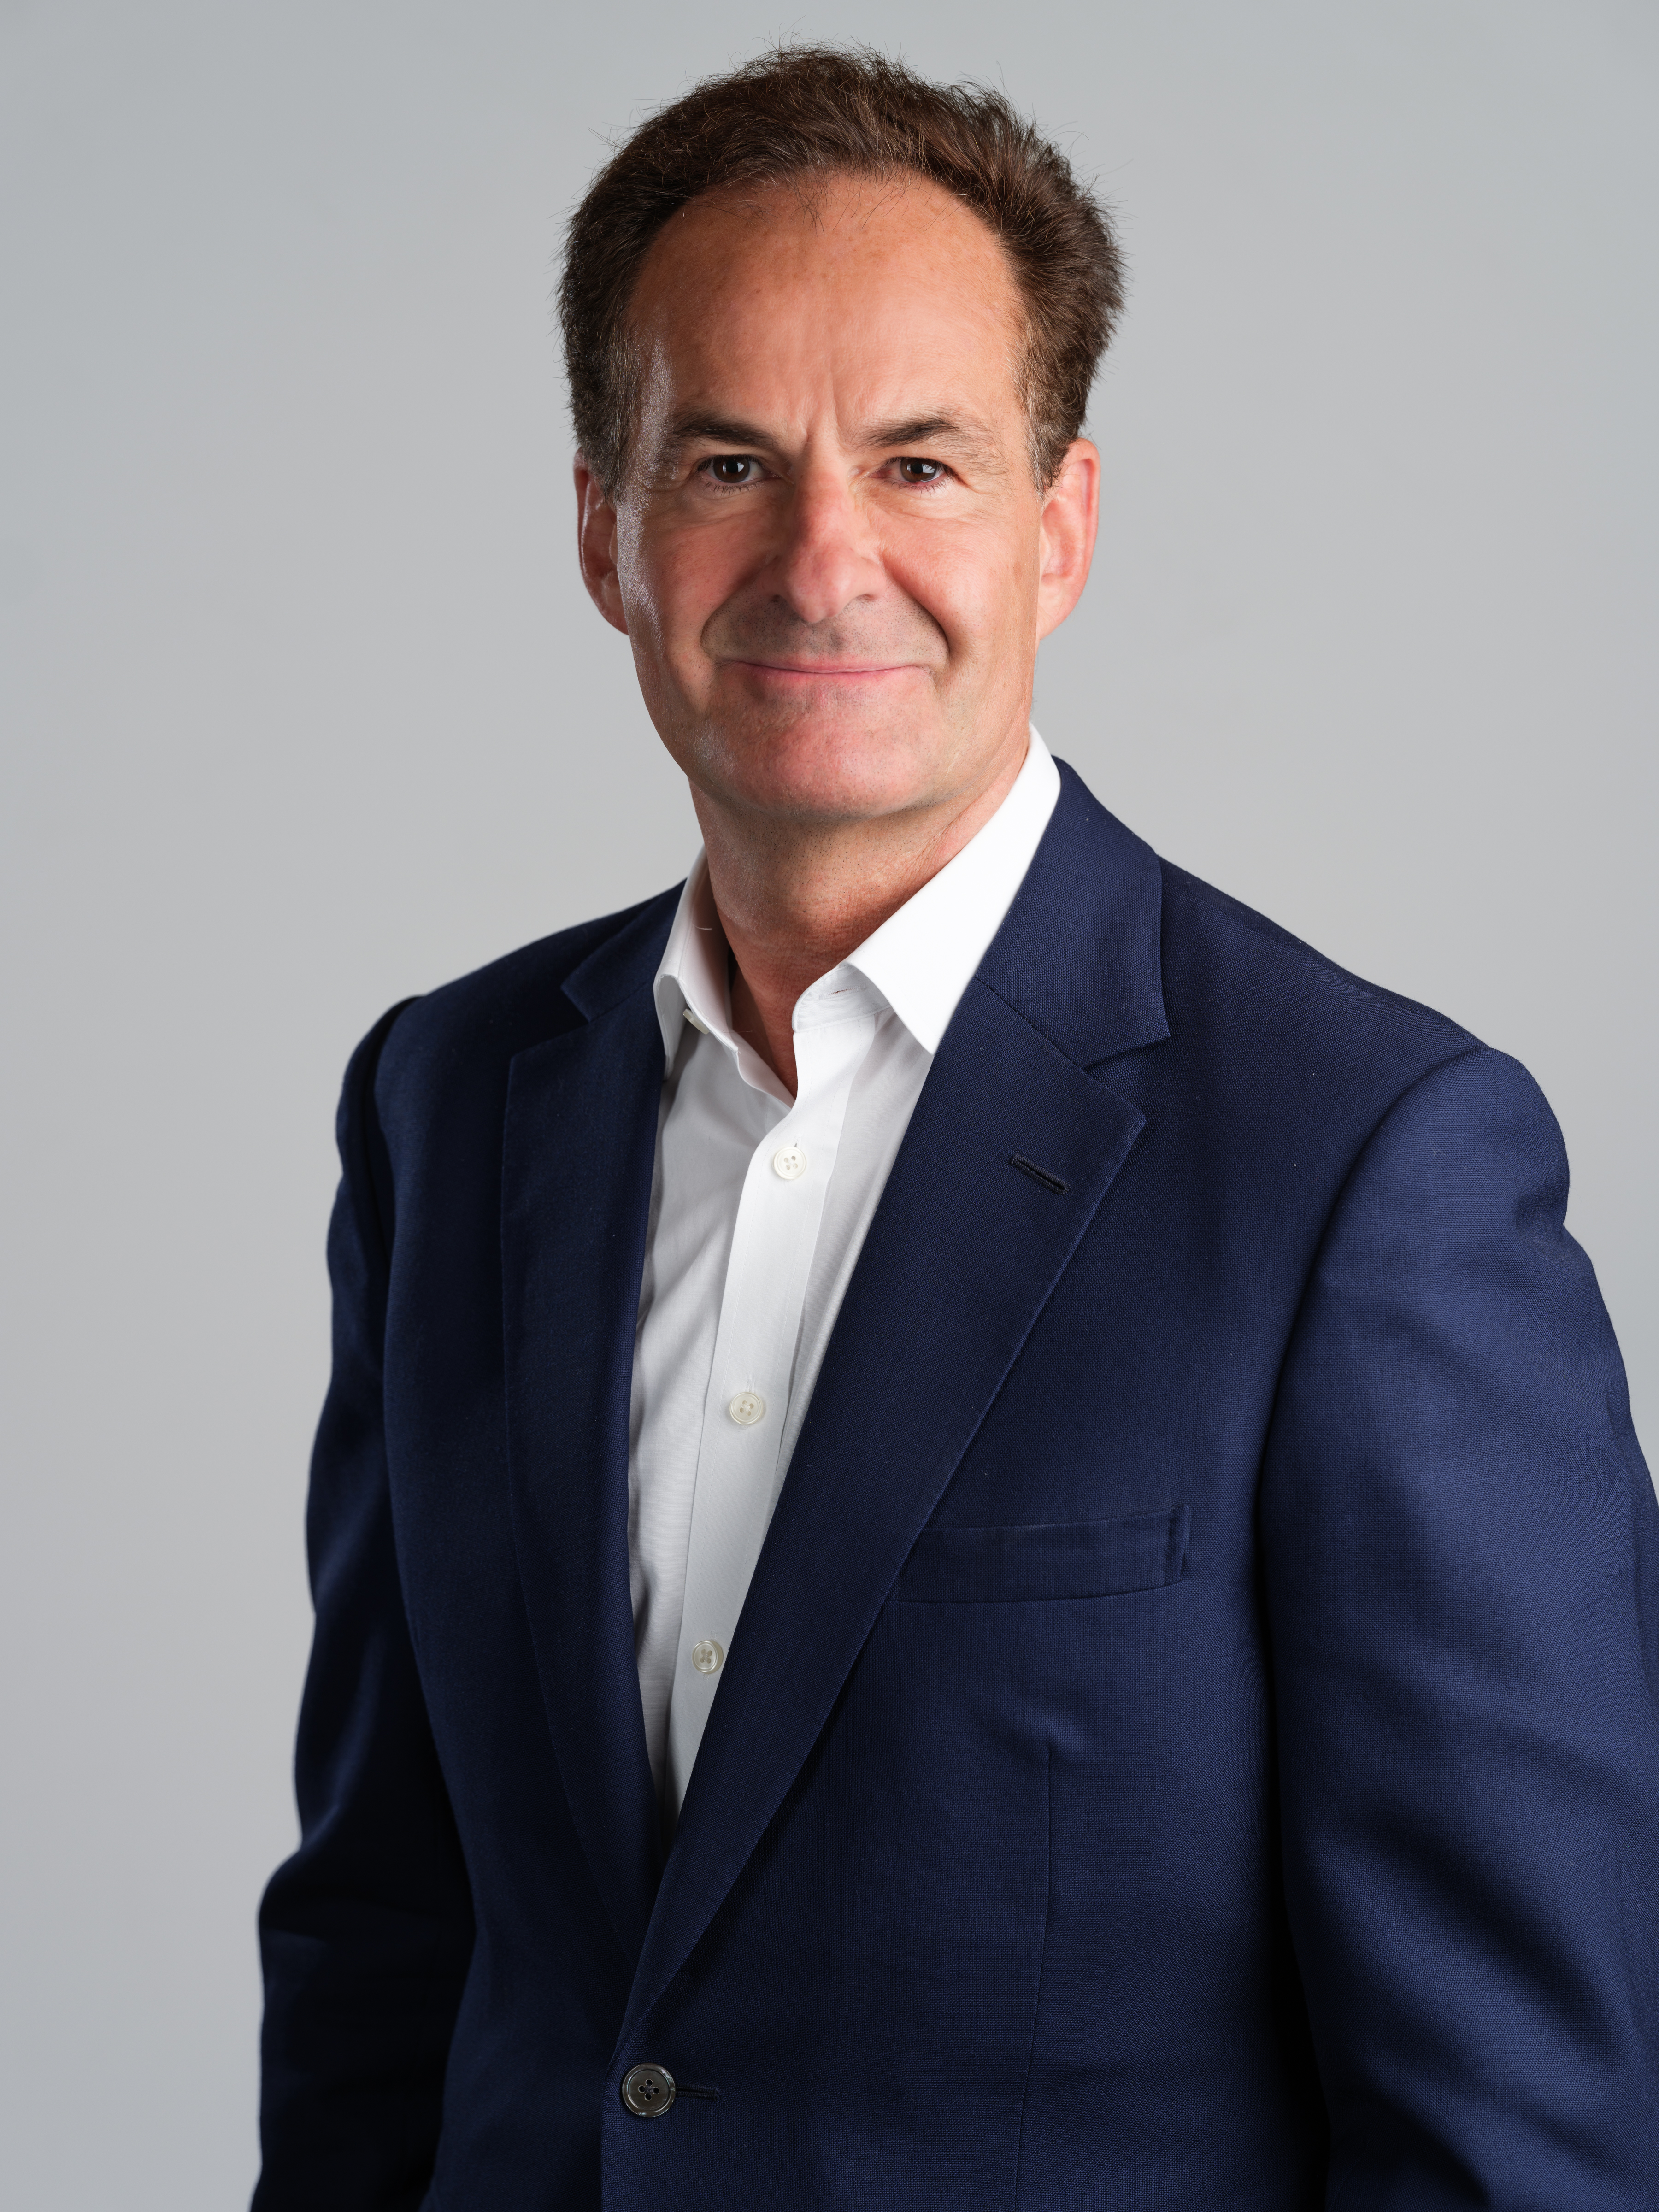 Brian Menell, Chairman and CEO of TechMet